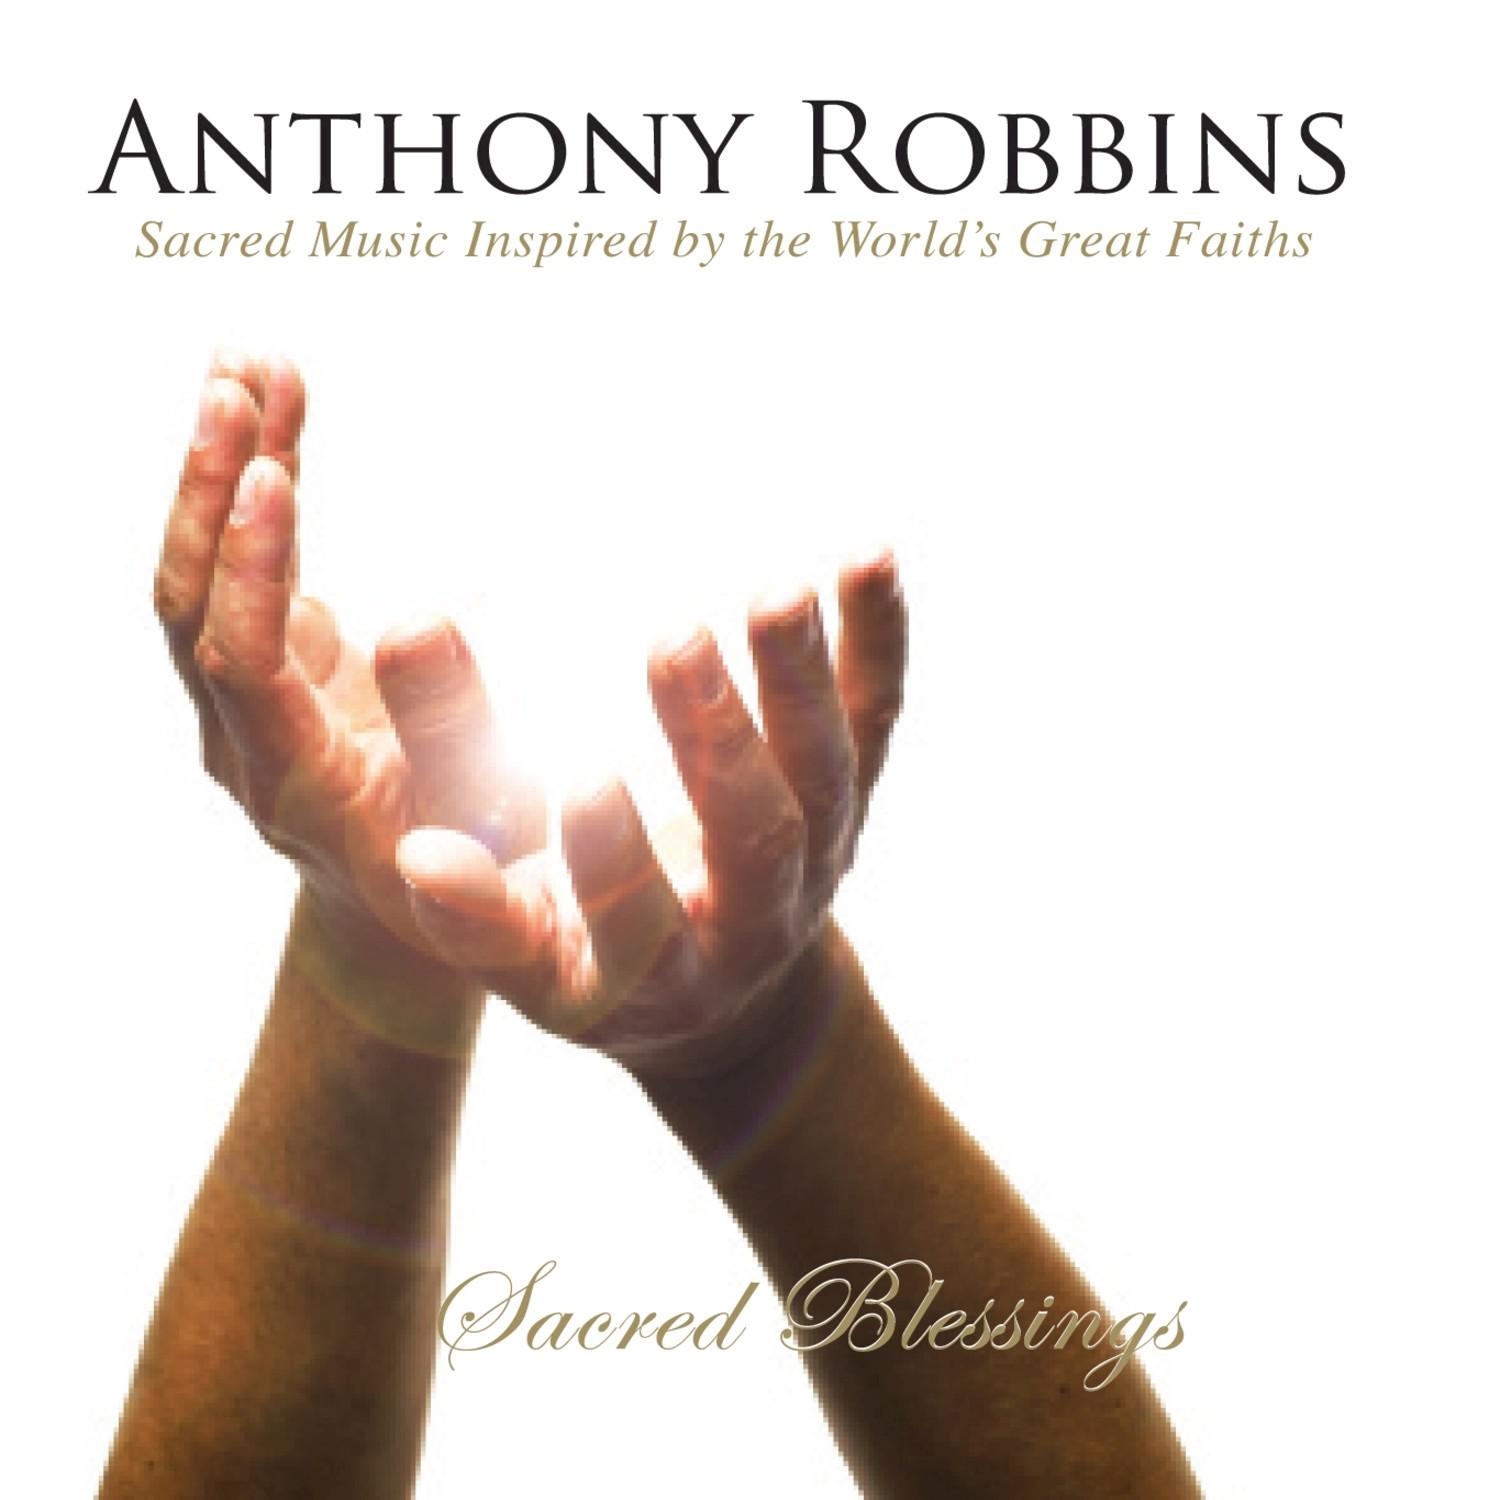 Anthony Robbins' Sacred Blessings